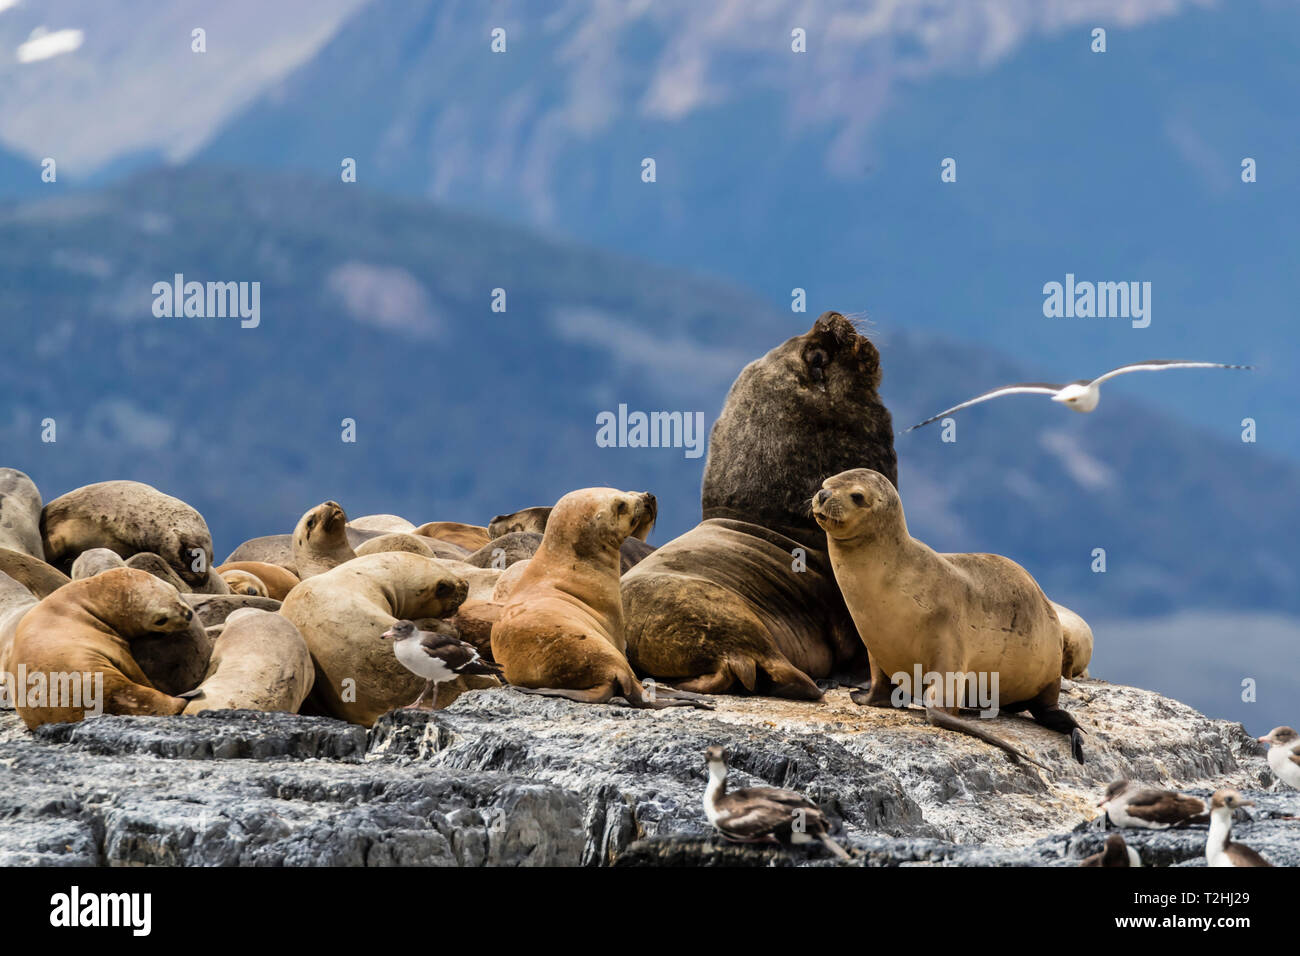 South American sea lions, Otaria flavescens, hauled out on a small islet in the Beagle Channel, Ushuaia, Argentina, South America Stock Photo